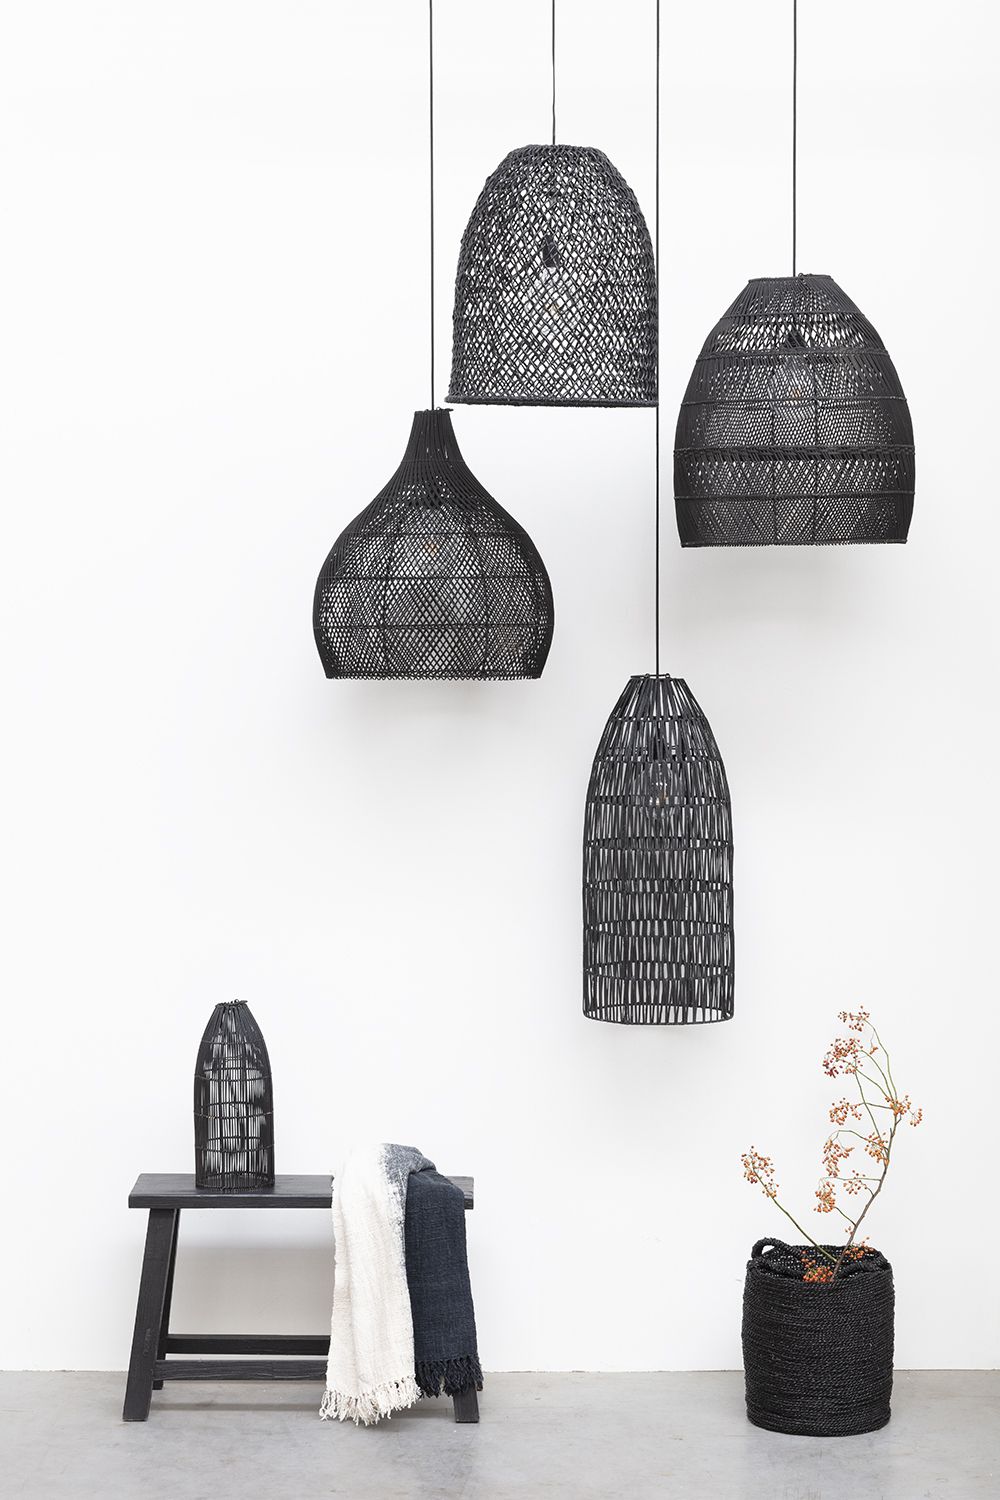 The most beautiful Eco Design lampshades from Original Home